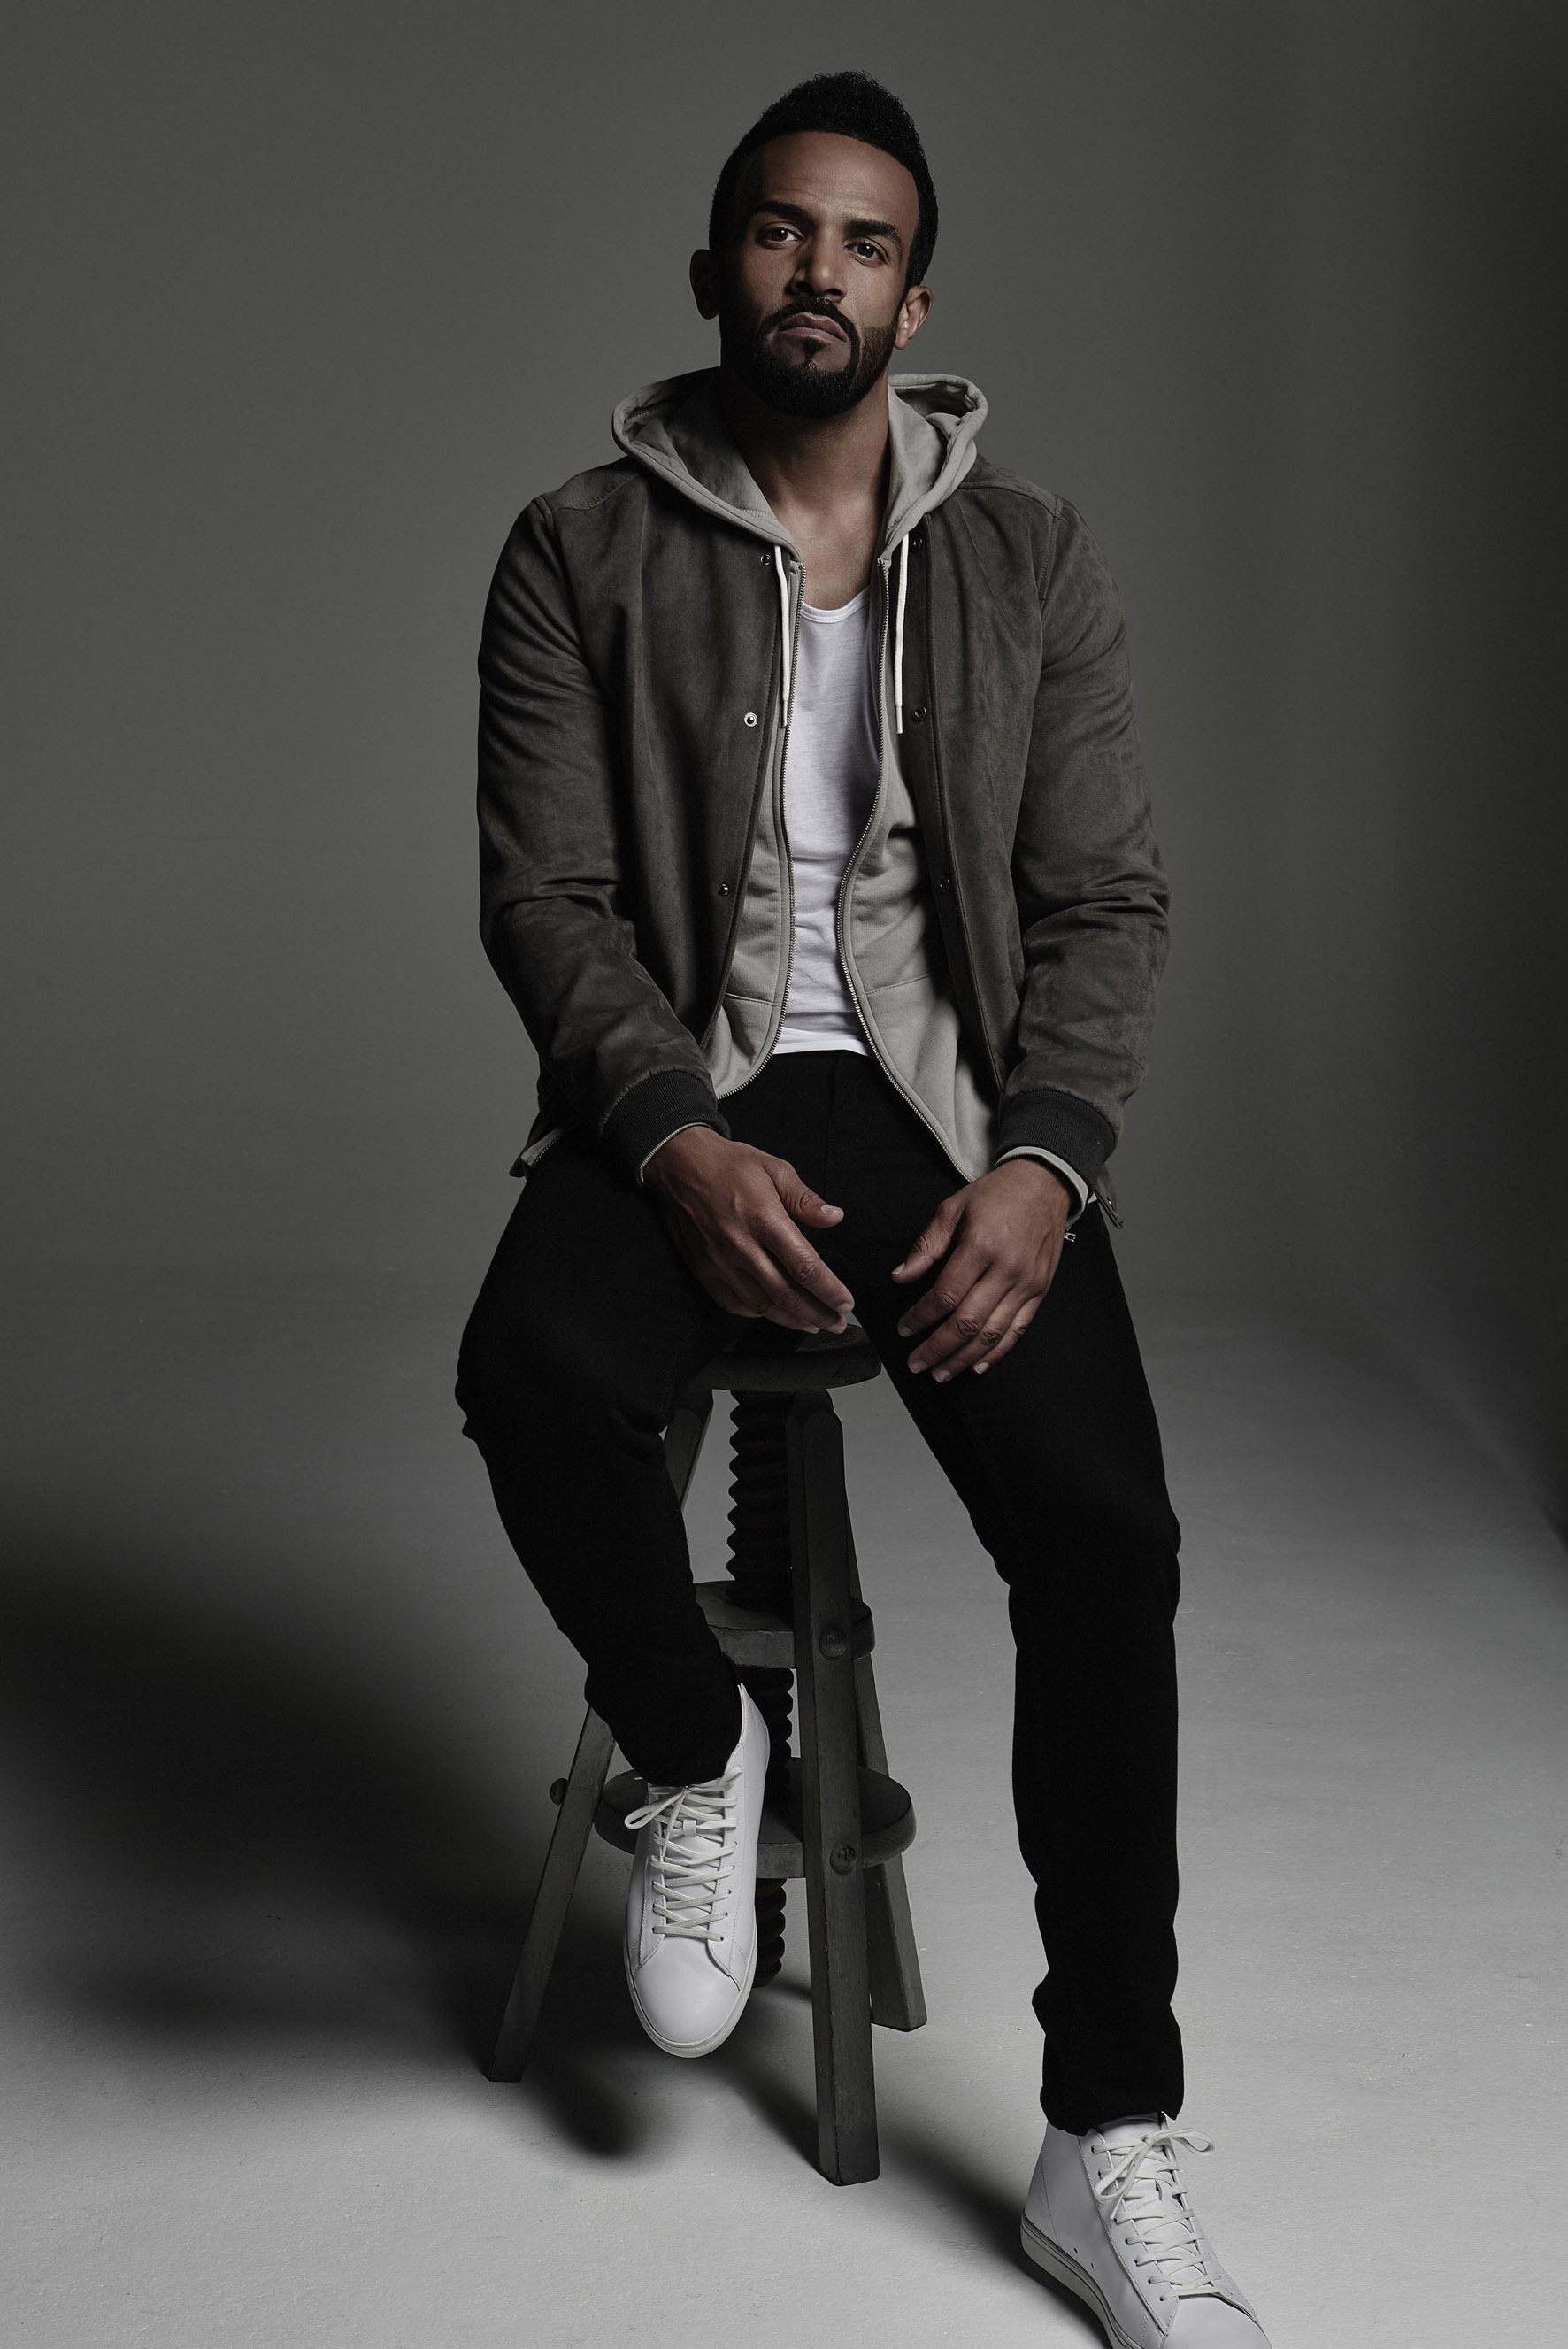 Craig David to appear at Dalby Forest - Gazette & Herald